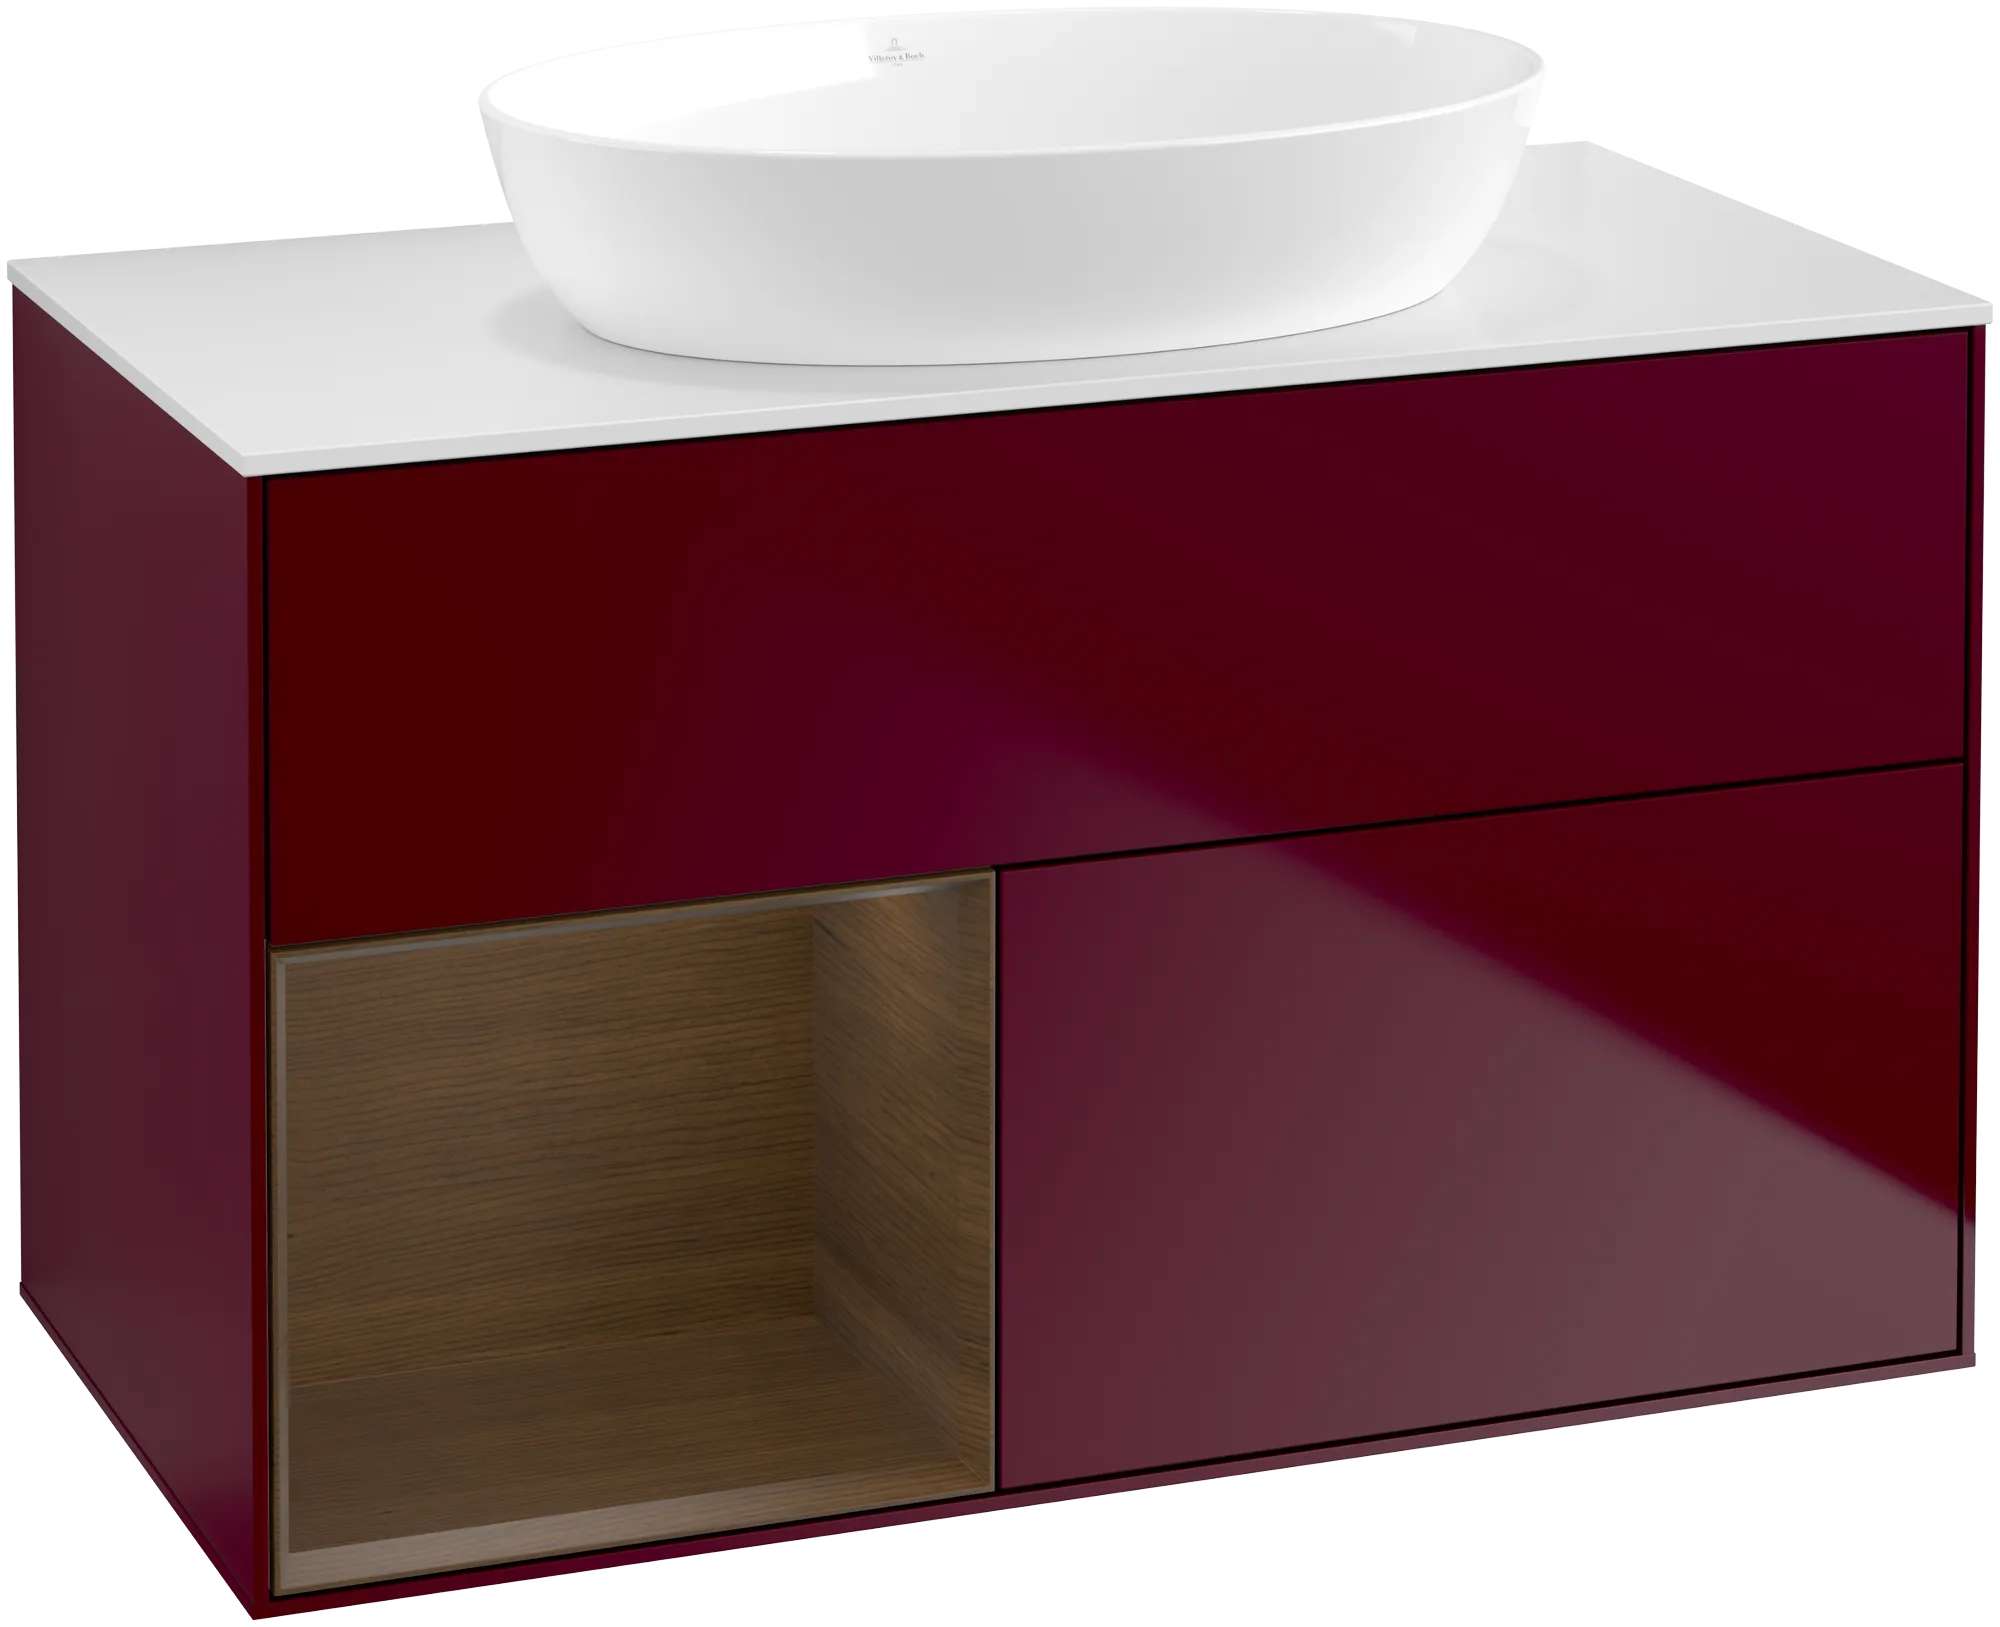 Picture of VILLEROY BOCH Finion Vanity unit, with lighting, 2 pull-out compartments, 1000 x 603 x 501 mm, Peony Matt Lacquer / Walnut Veneer / Glass White Matt #GA11GNHB